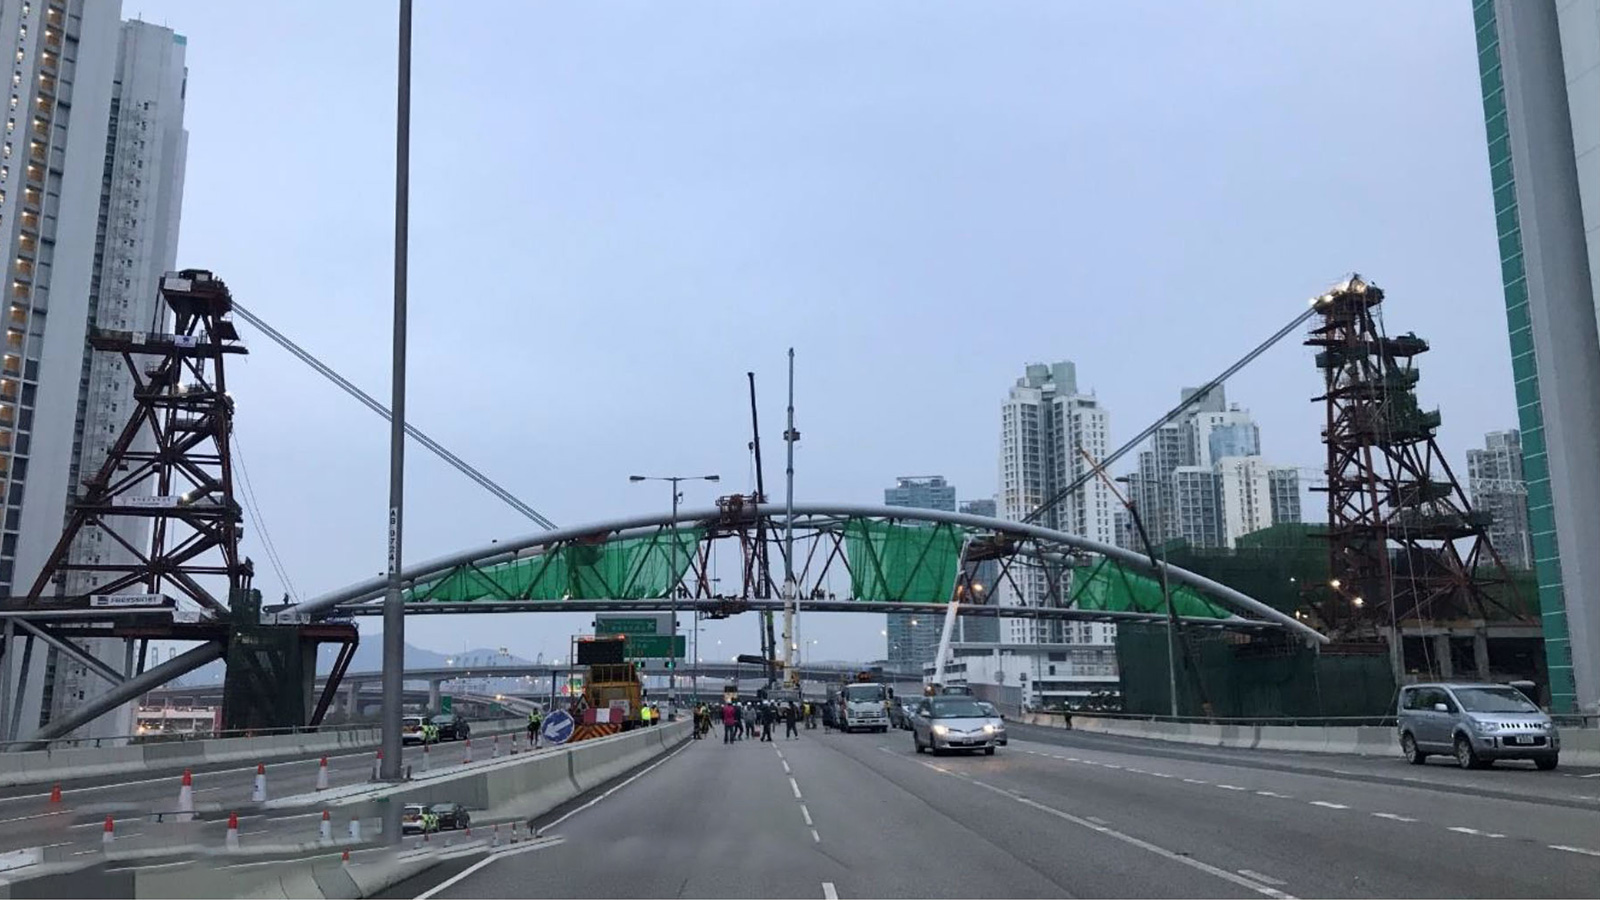 Connection of footbridge sections completed (morning of 29 December 2019)